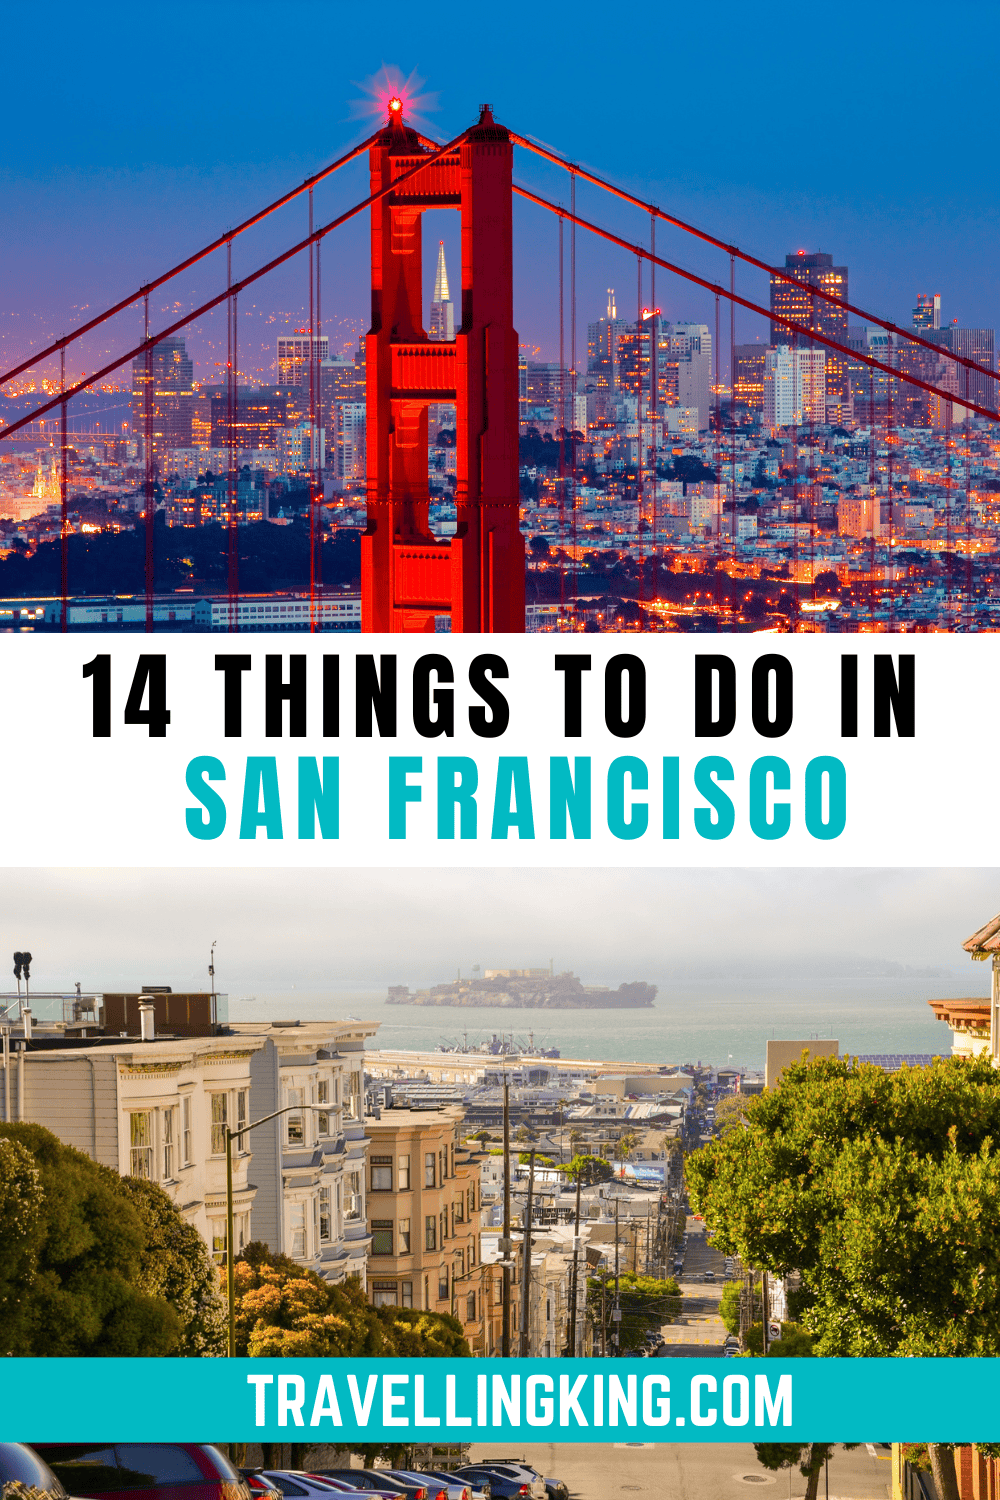 14 TOP Things to do in San Francisco